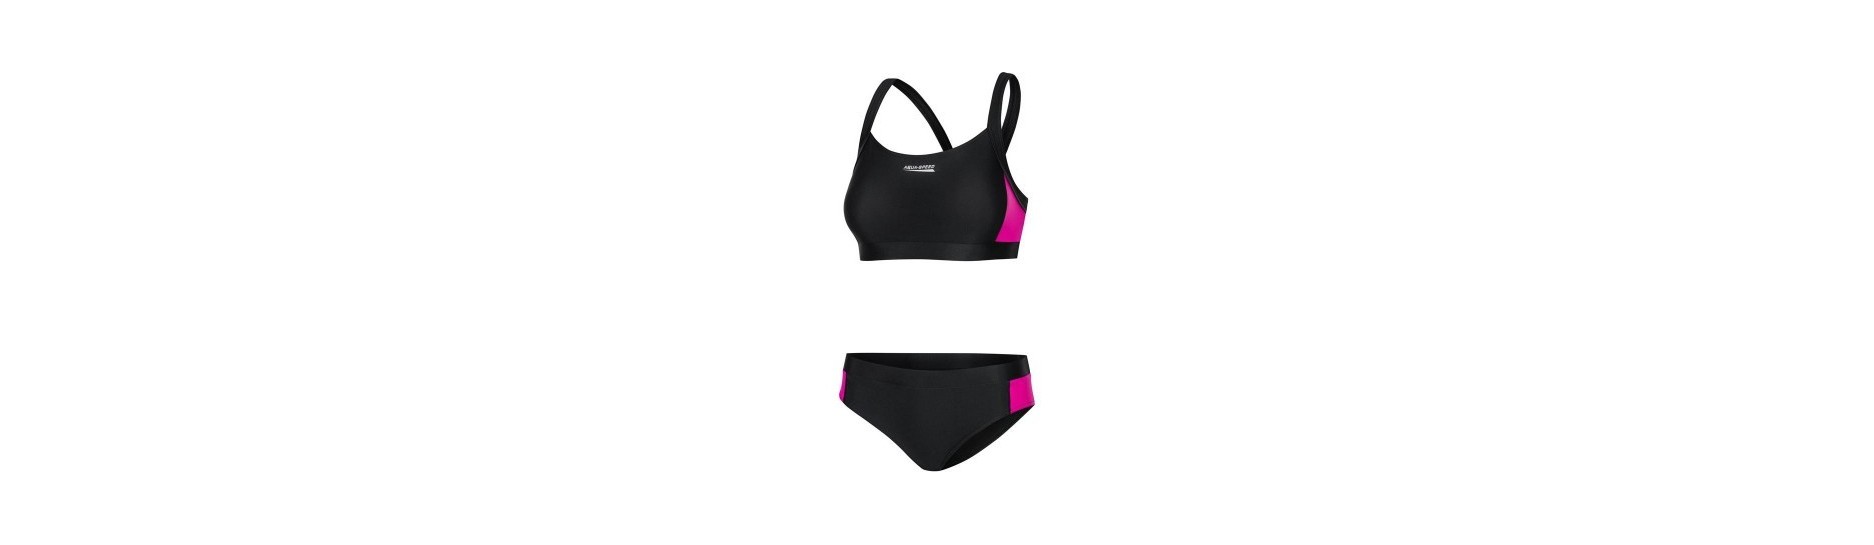 Sports two-piece swimsuit